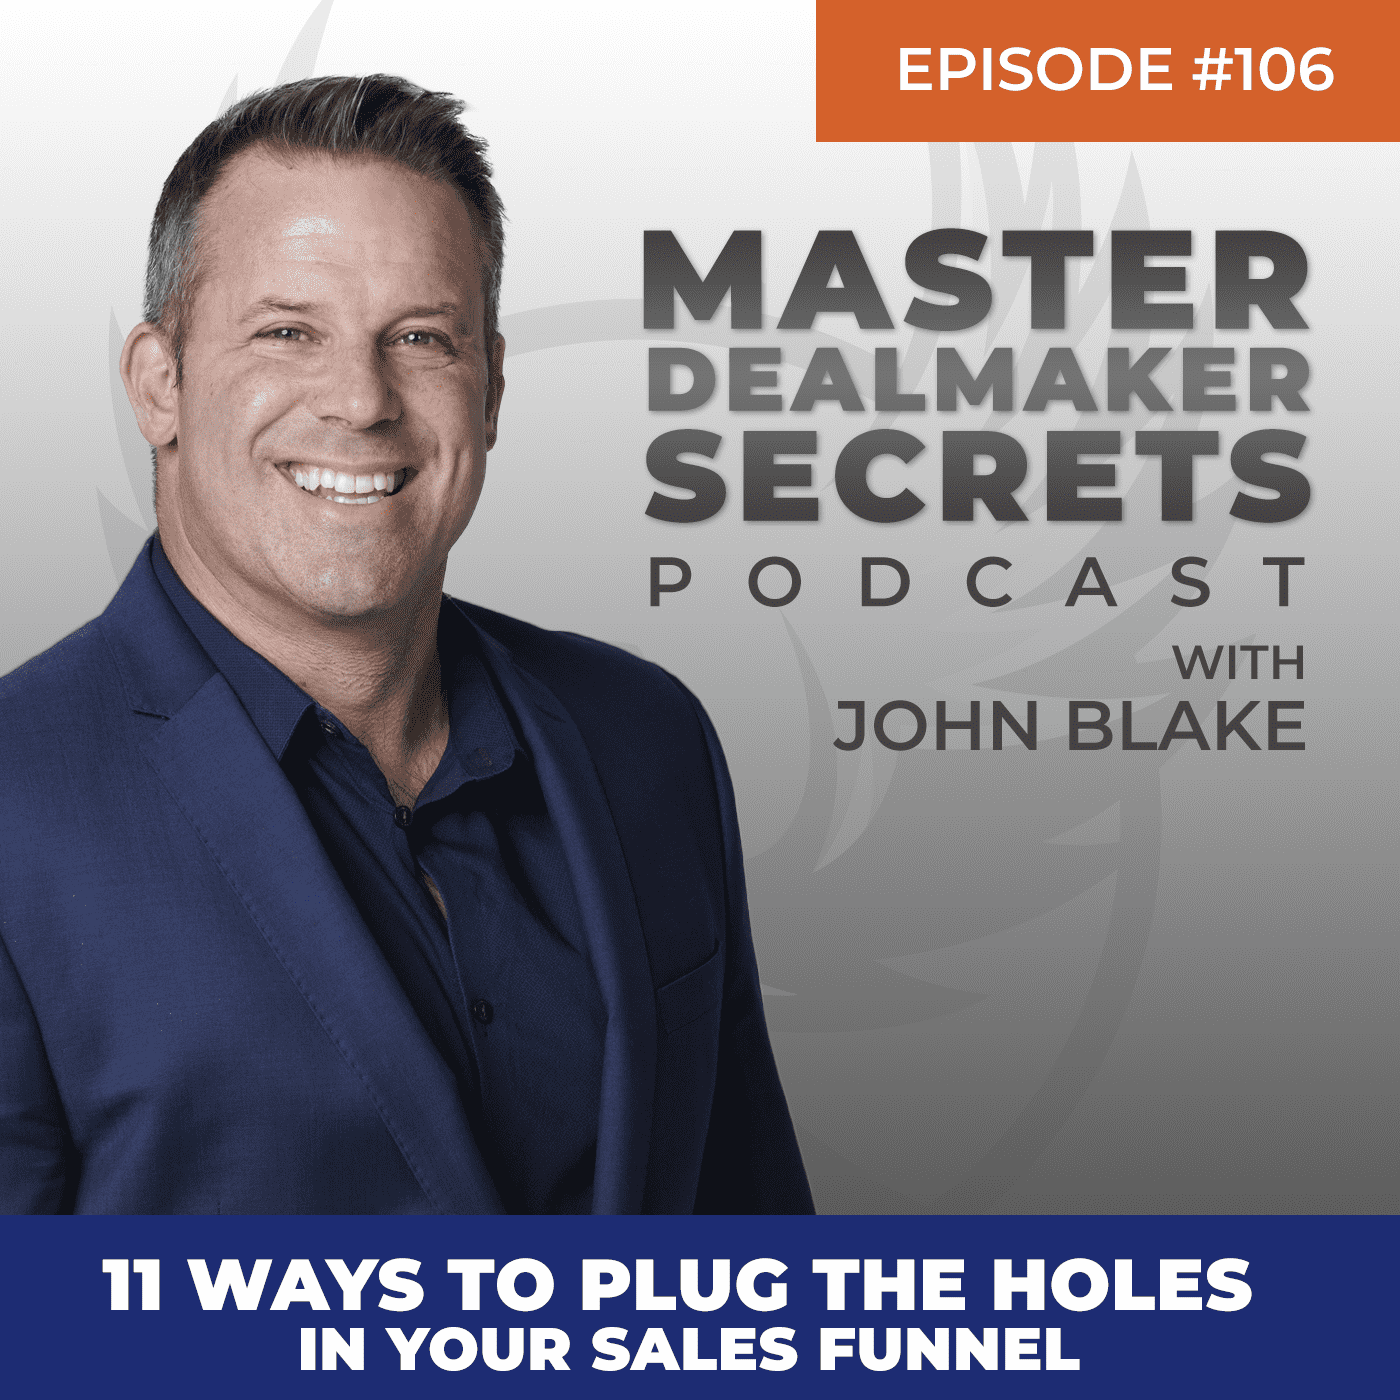 John Blake 11 Ways to Plug the Holes in Your Sales Funnel